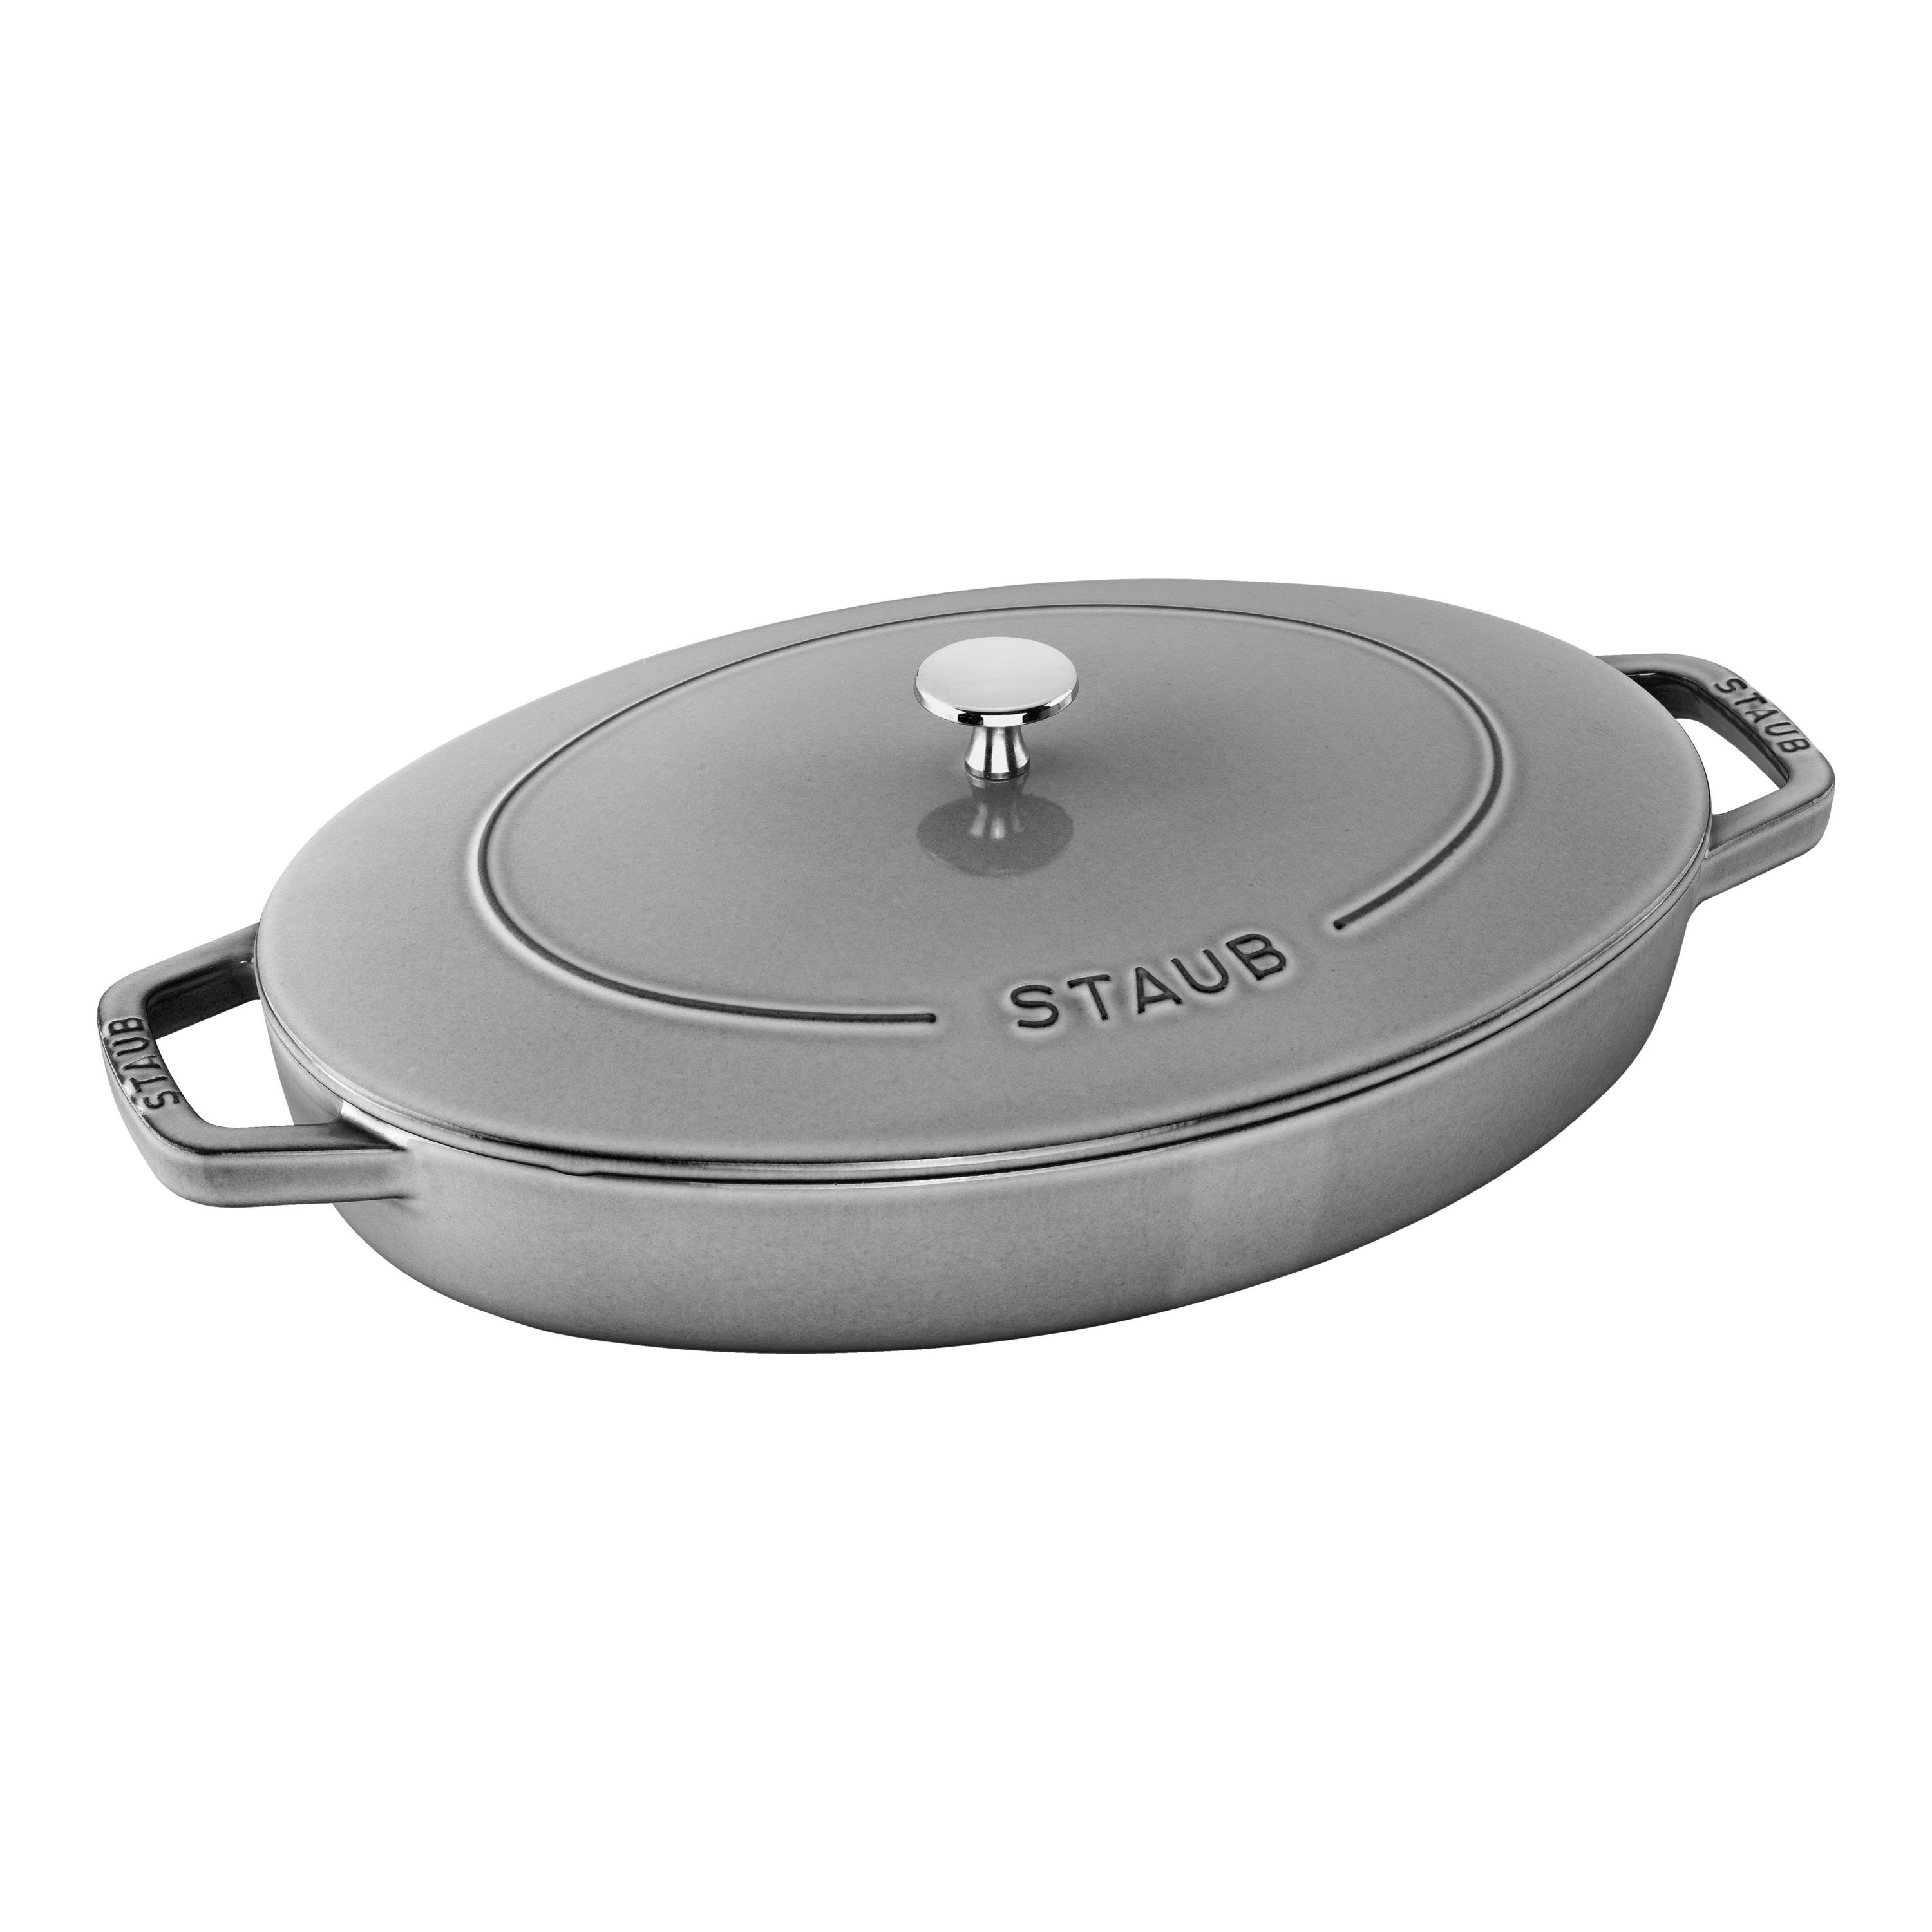 Staub Cast Iron 9-inch x 6.6-inch Oval Covered Baking Dish - Graphite Grey,  9 x 6.6 - Fry's Food Stores